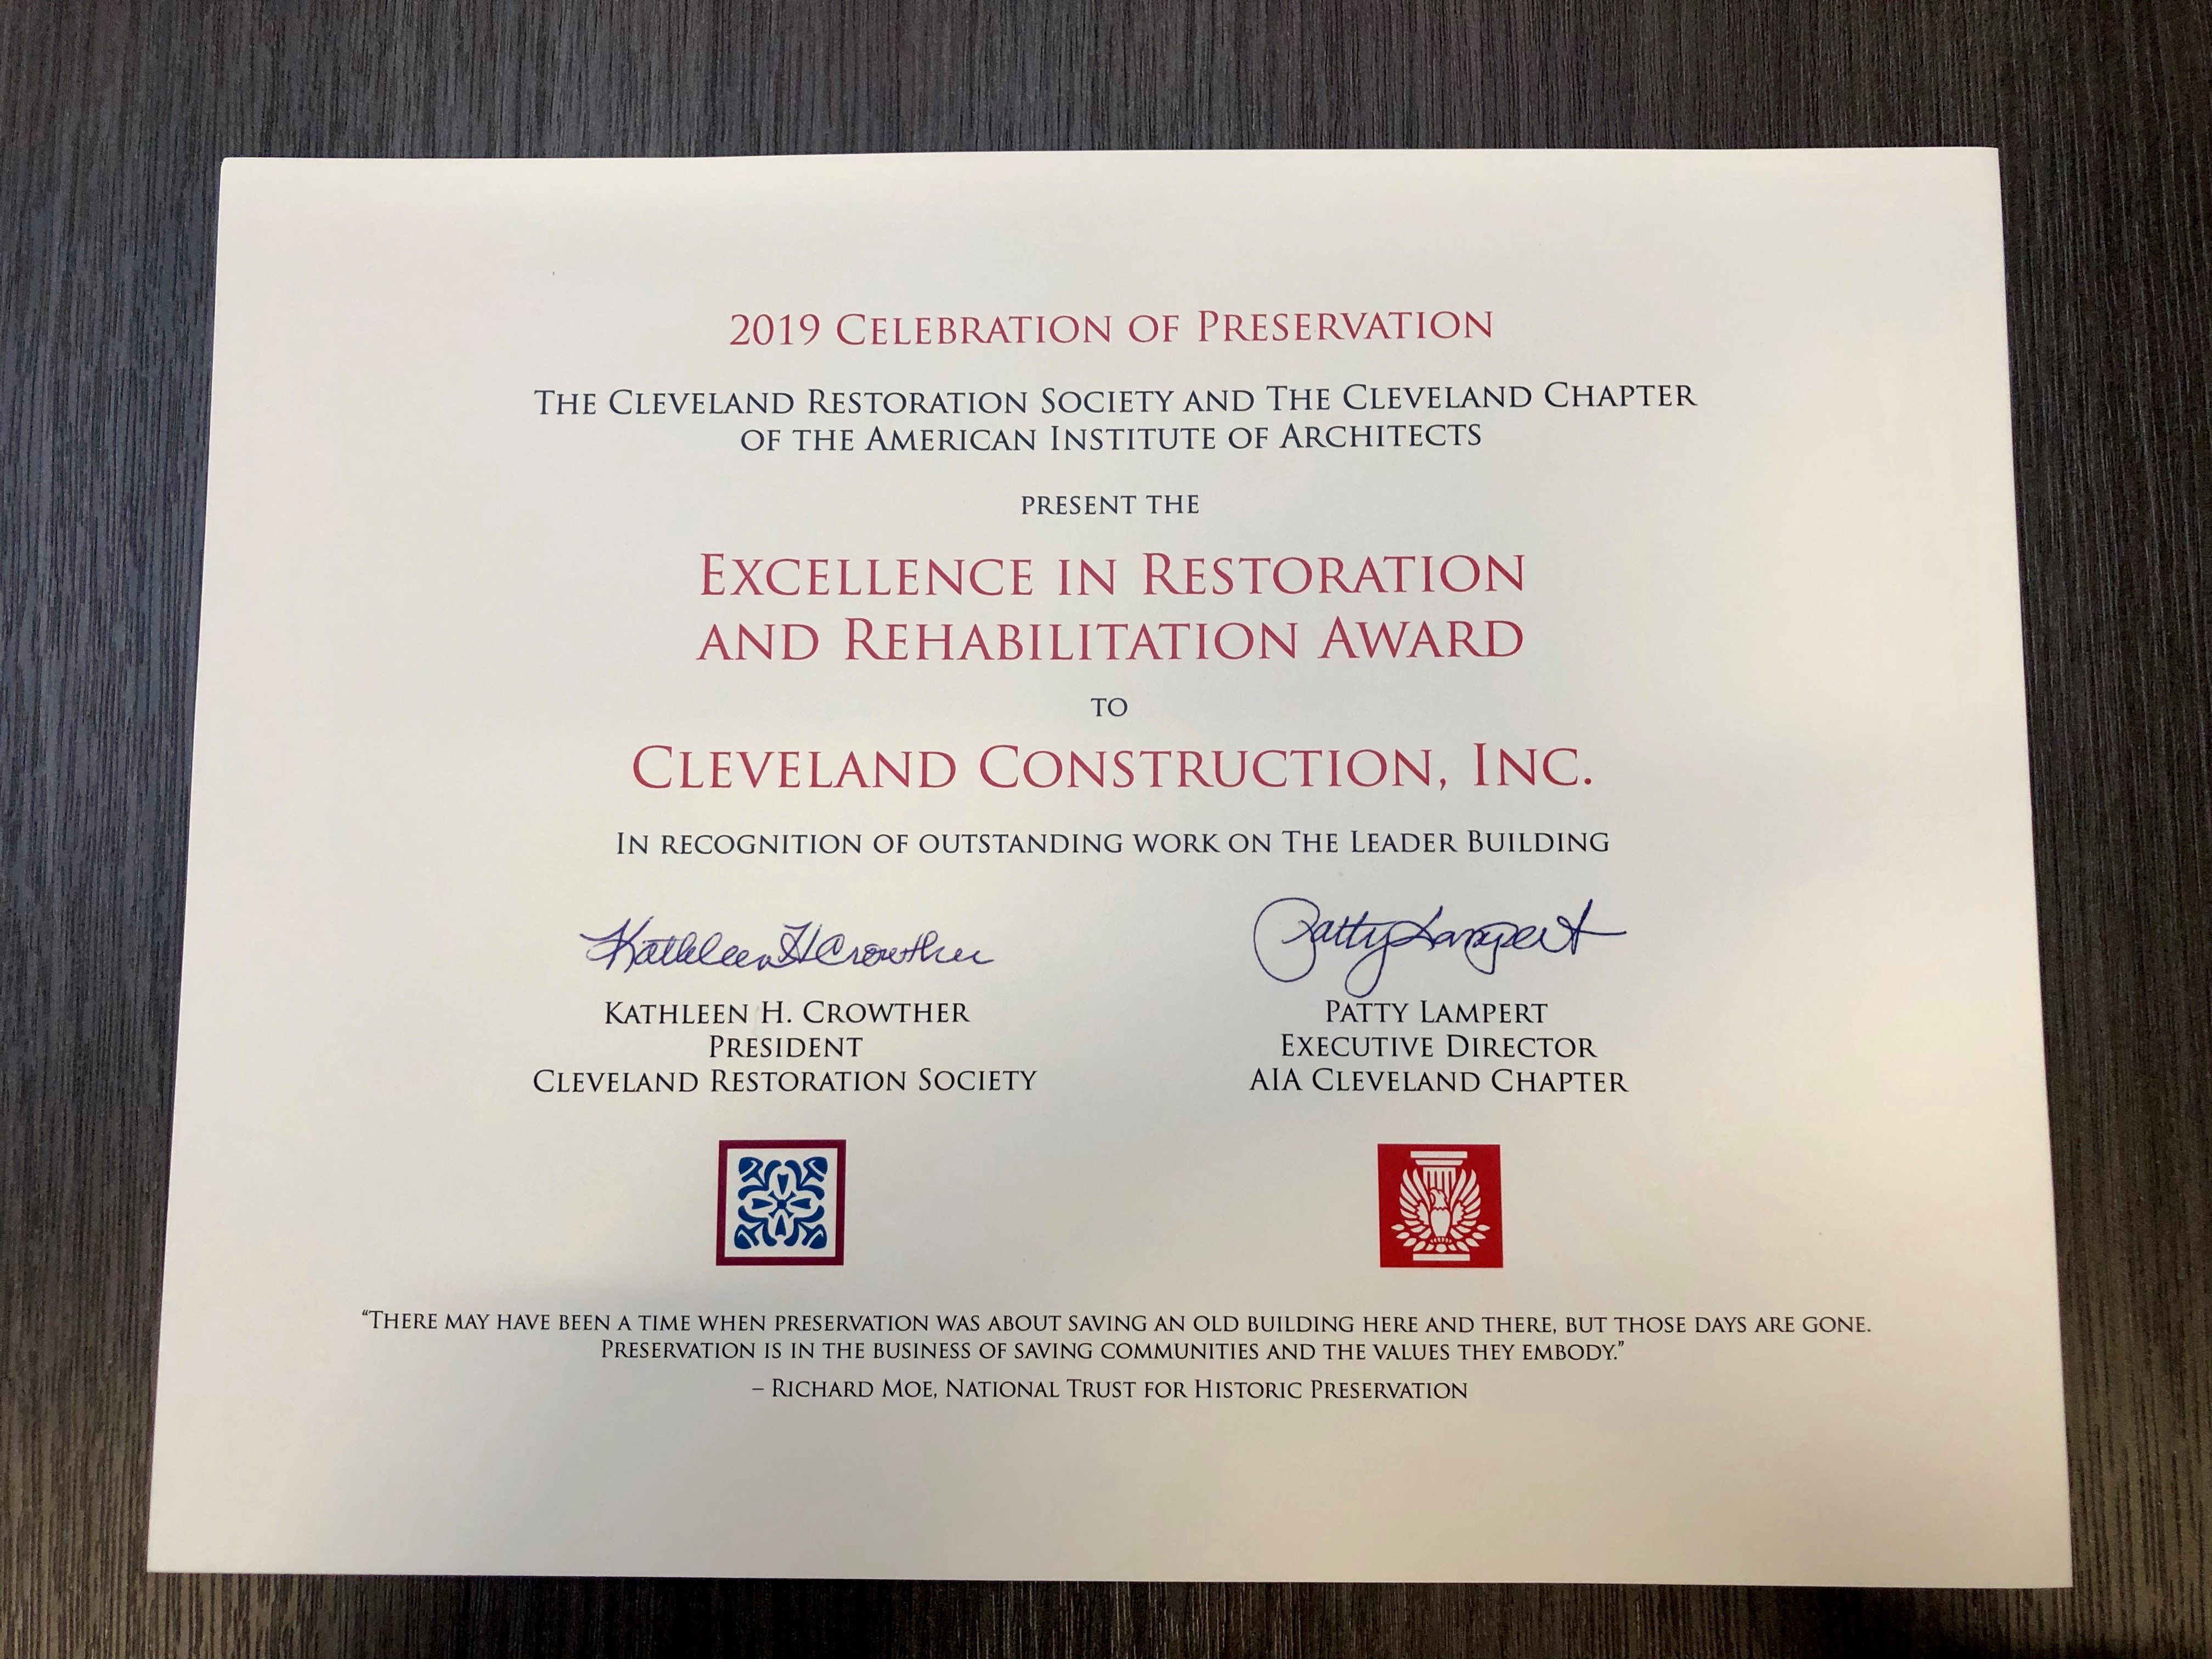 Cleveland Construction Receives Excellence in Restoration and Rehabilitation Award